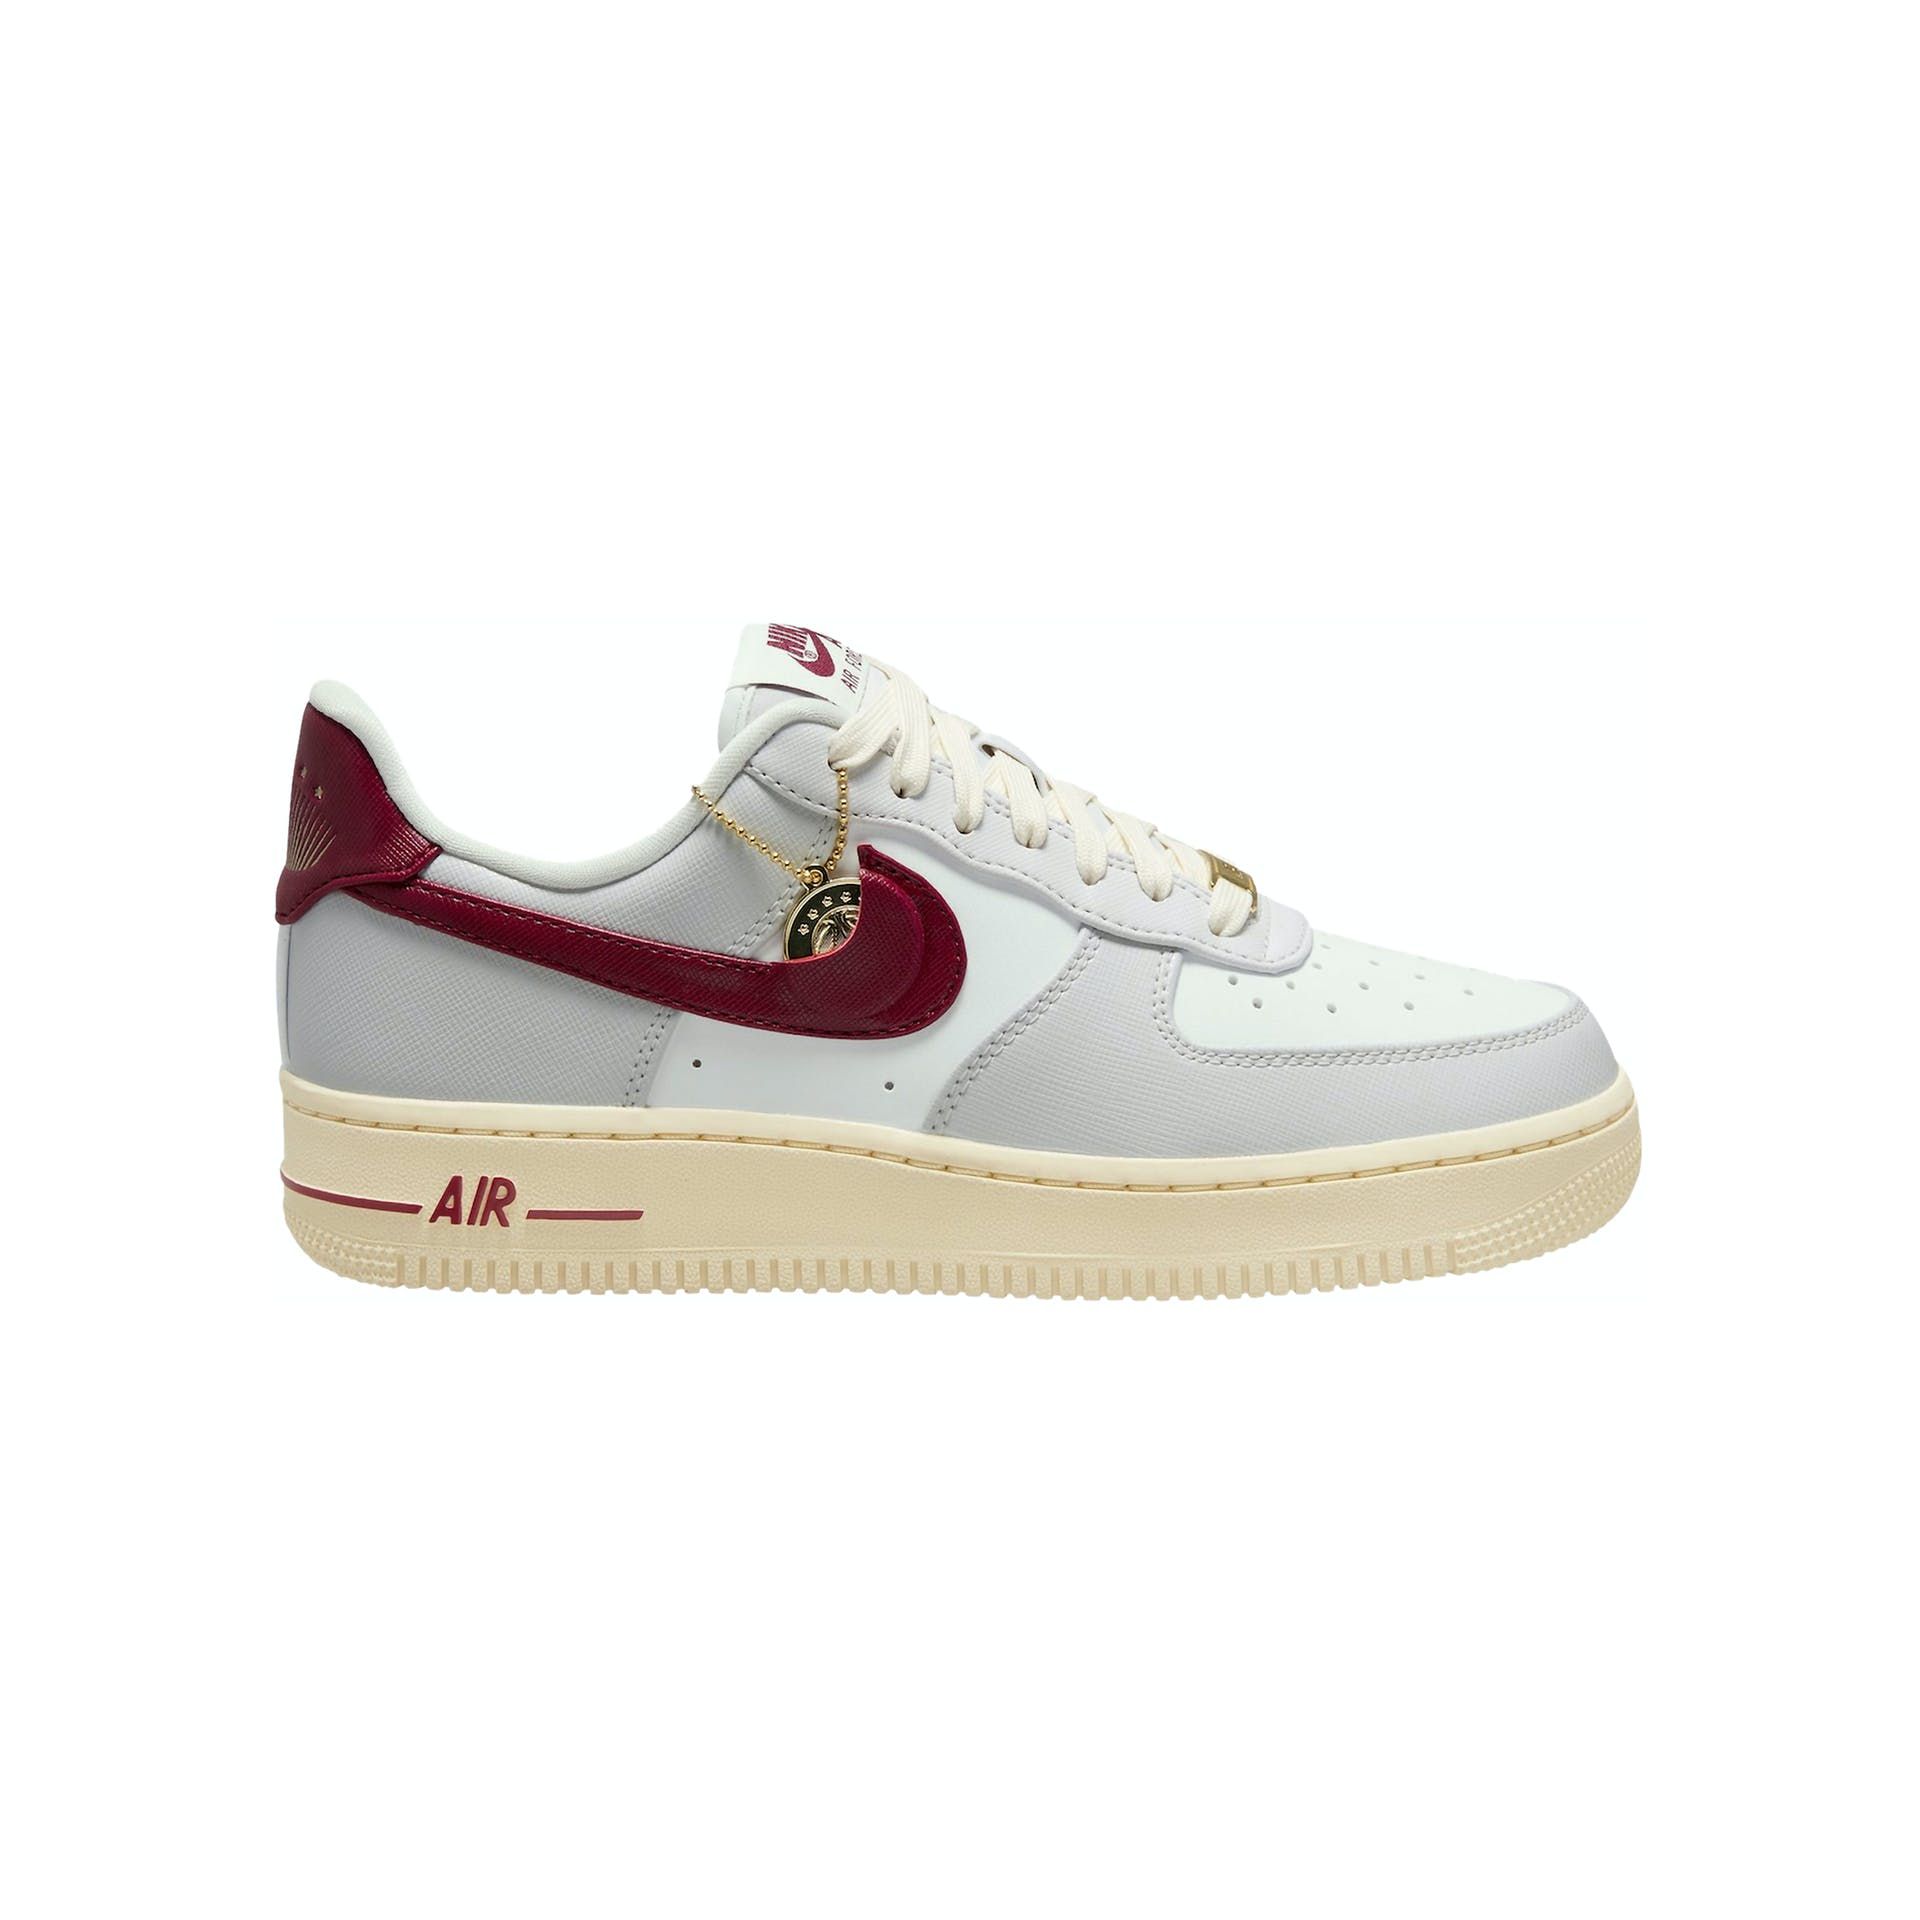 Wmns Nike Air Force 1 Low '07 SE 'Photon Dust Team Red'